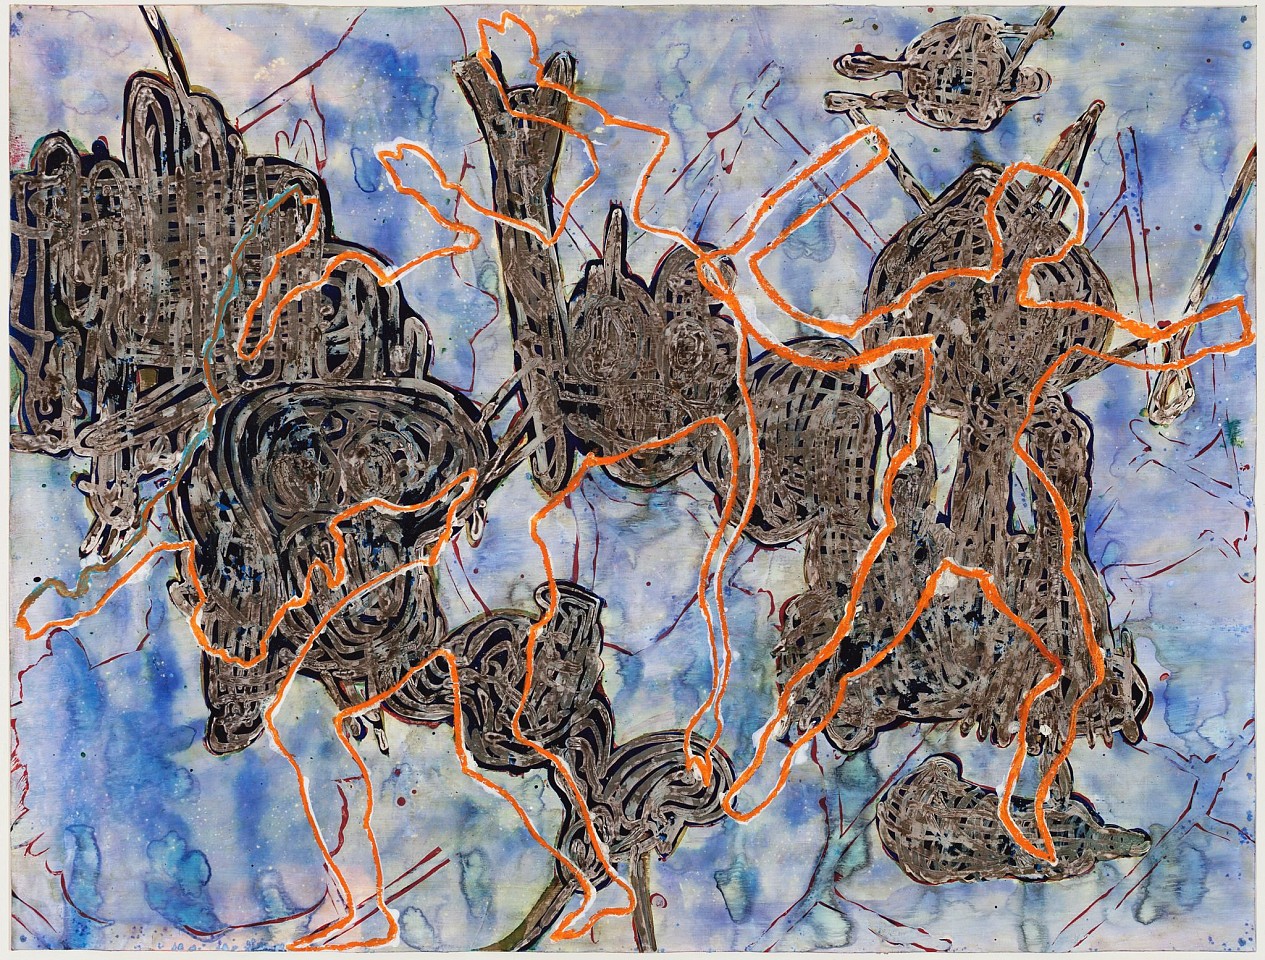 Bo Joseph
Untitled (1603), 2006
JOS243
ink, acrylic, tempera, gesso, watercolor, and caran d'ache on paper, 18 1/4 x 24 3/4 inch paper